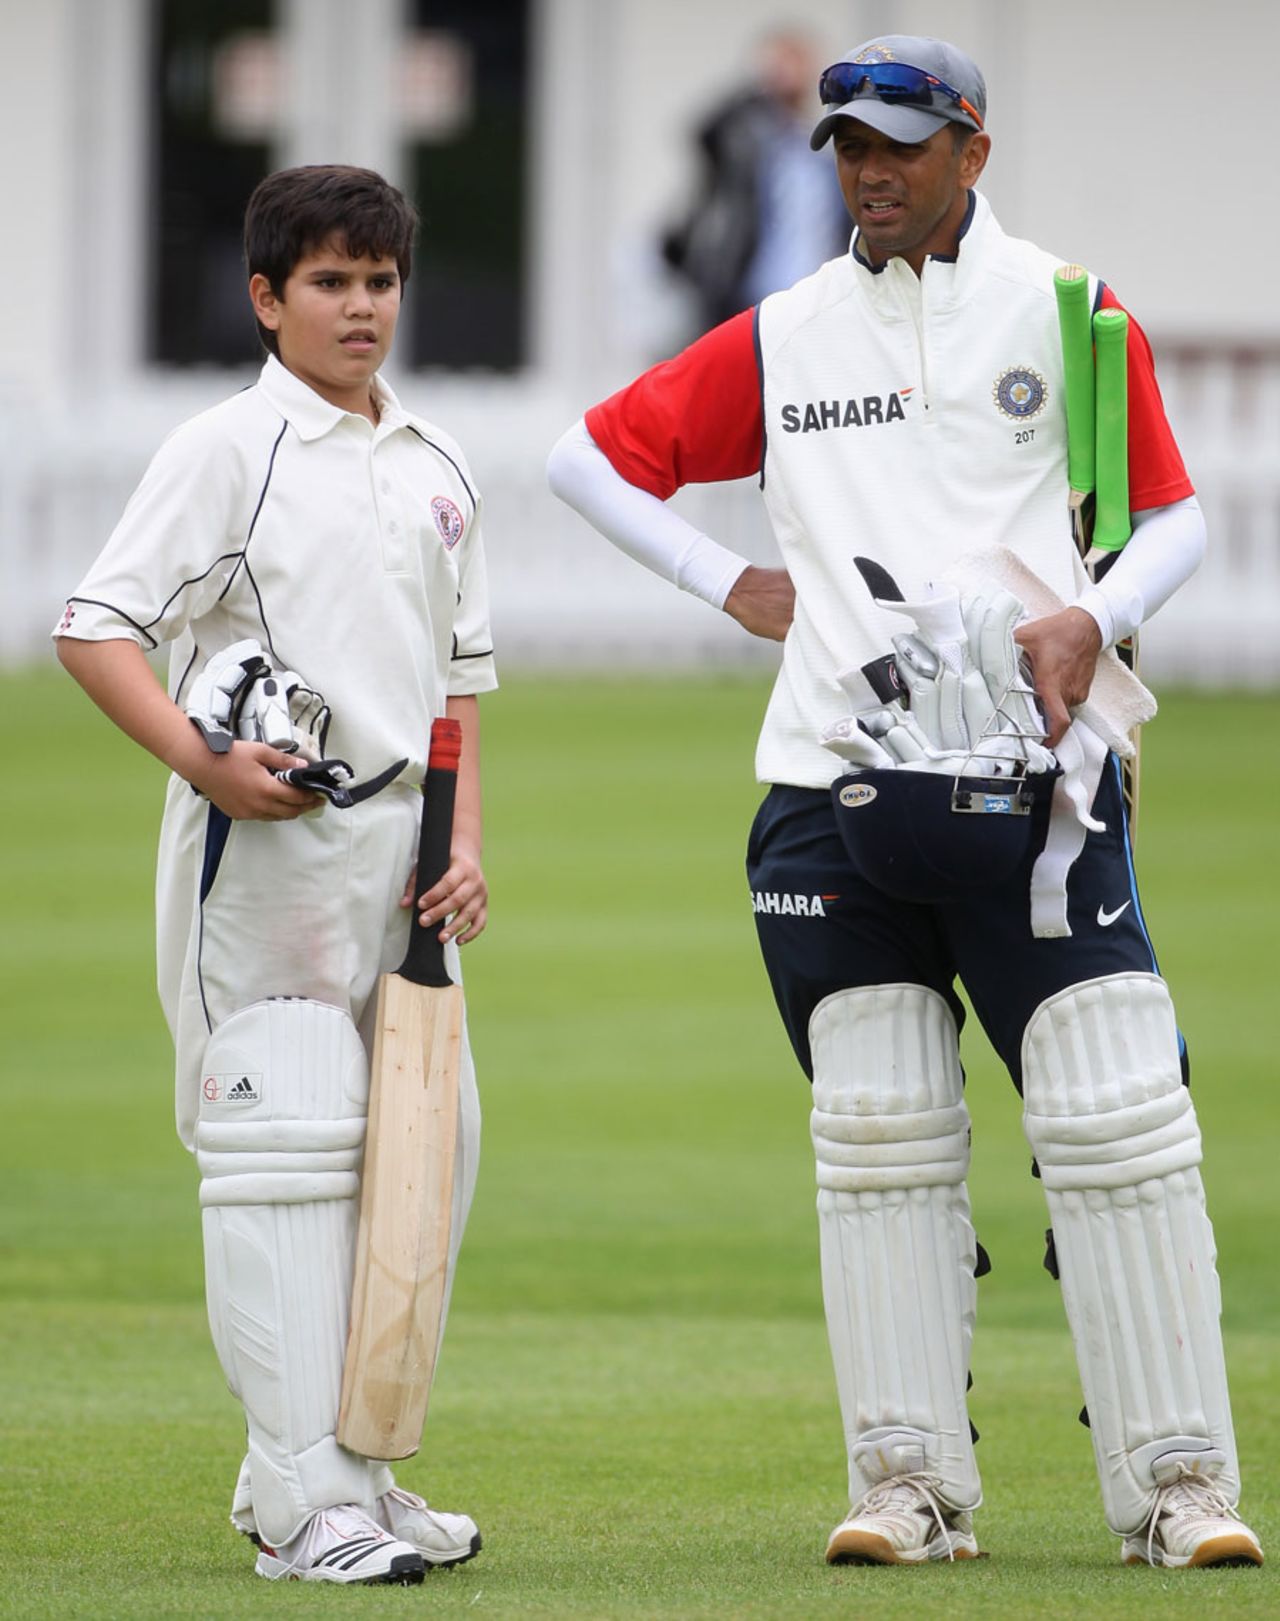 Rahul Dravid chats with Sachin Tendulkar's son Arjun during a practice session, Lord's, July 20, 2011